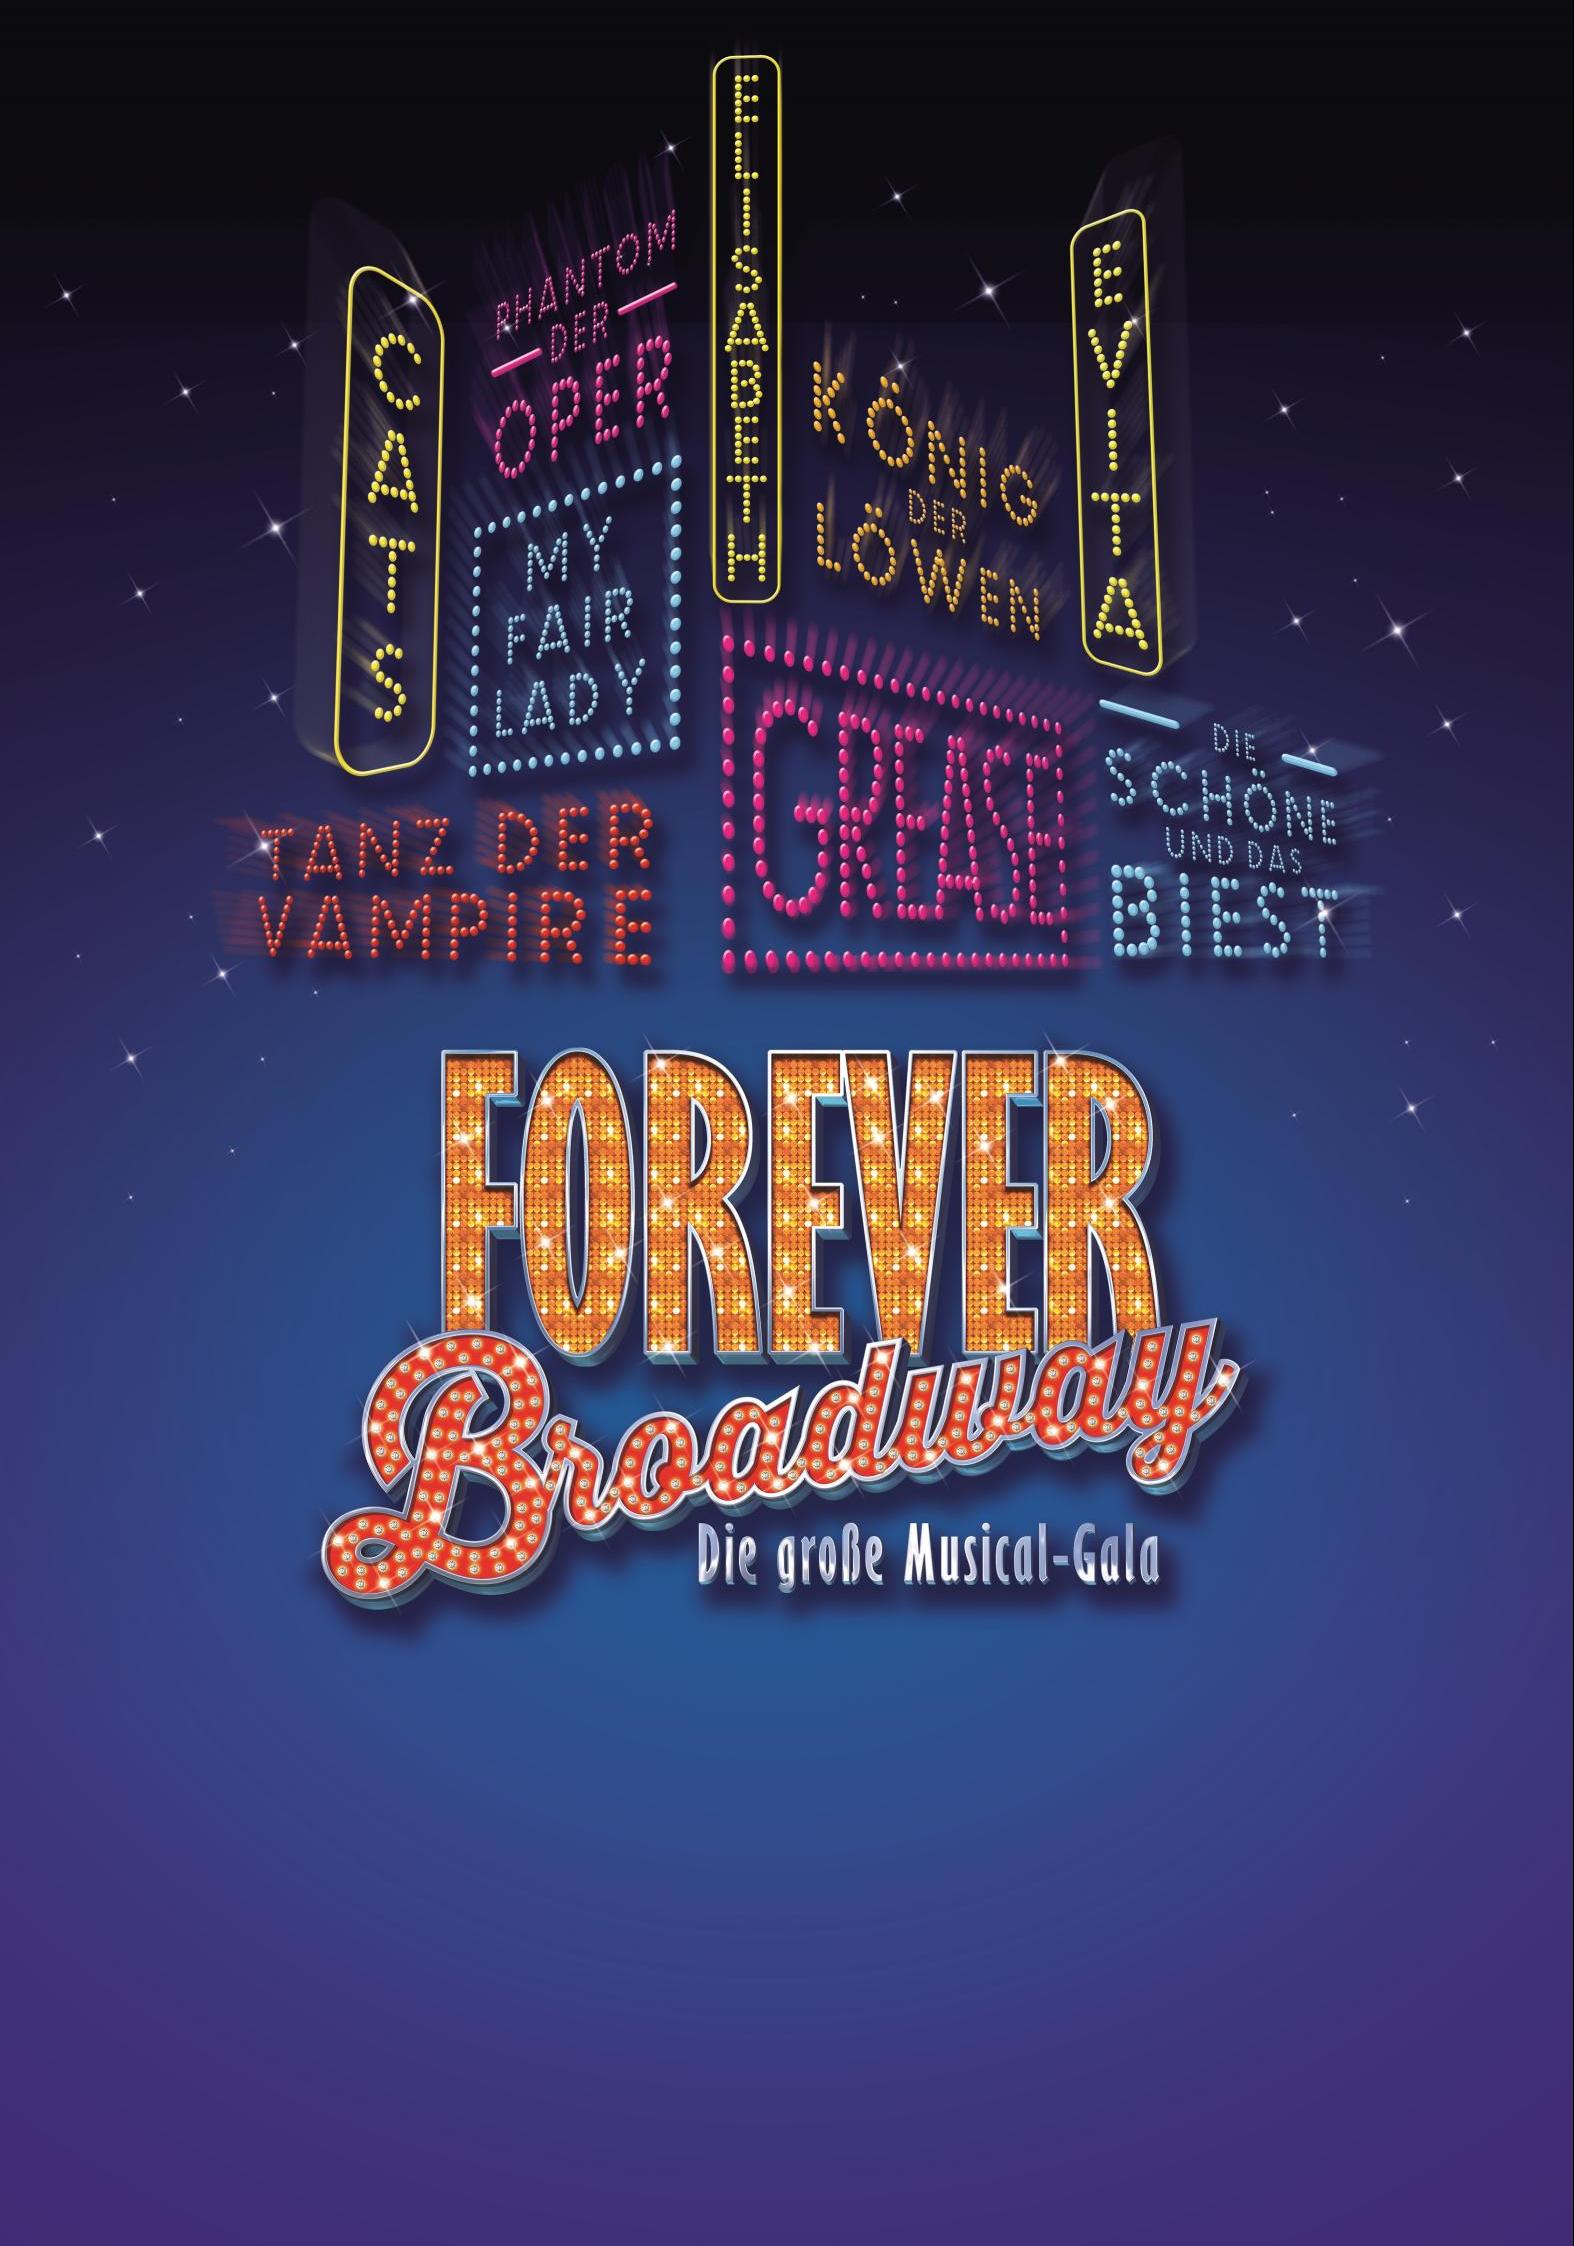 Against a background that looks like a night sky, the titles of various musicals and the words "Forever Broadway" shine as if written with colored light bulbs.